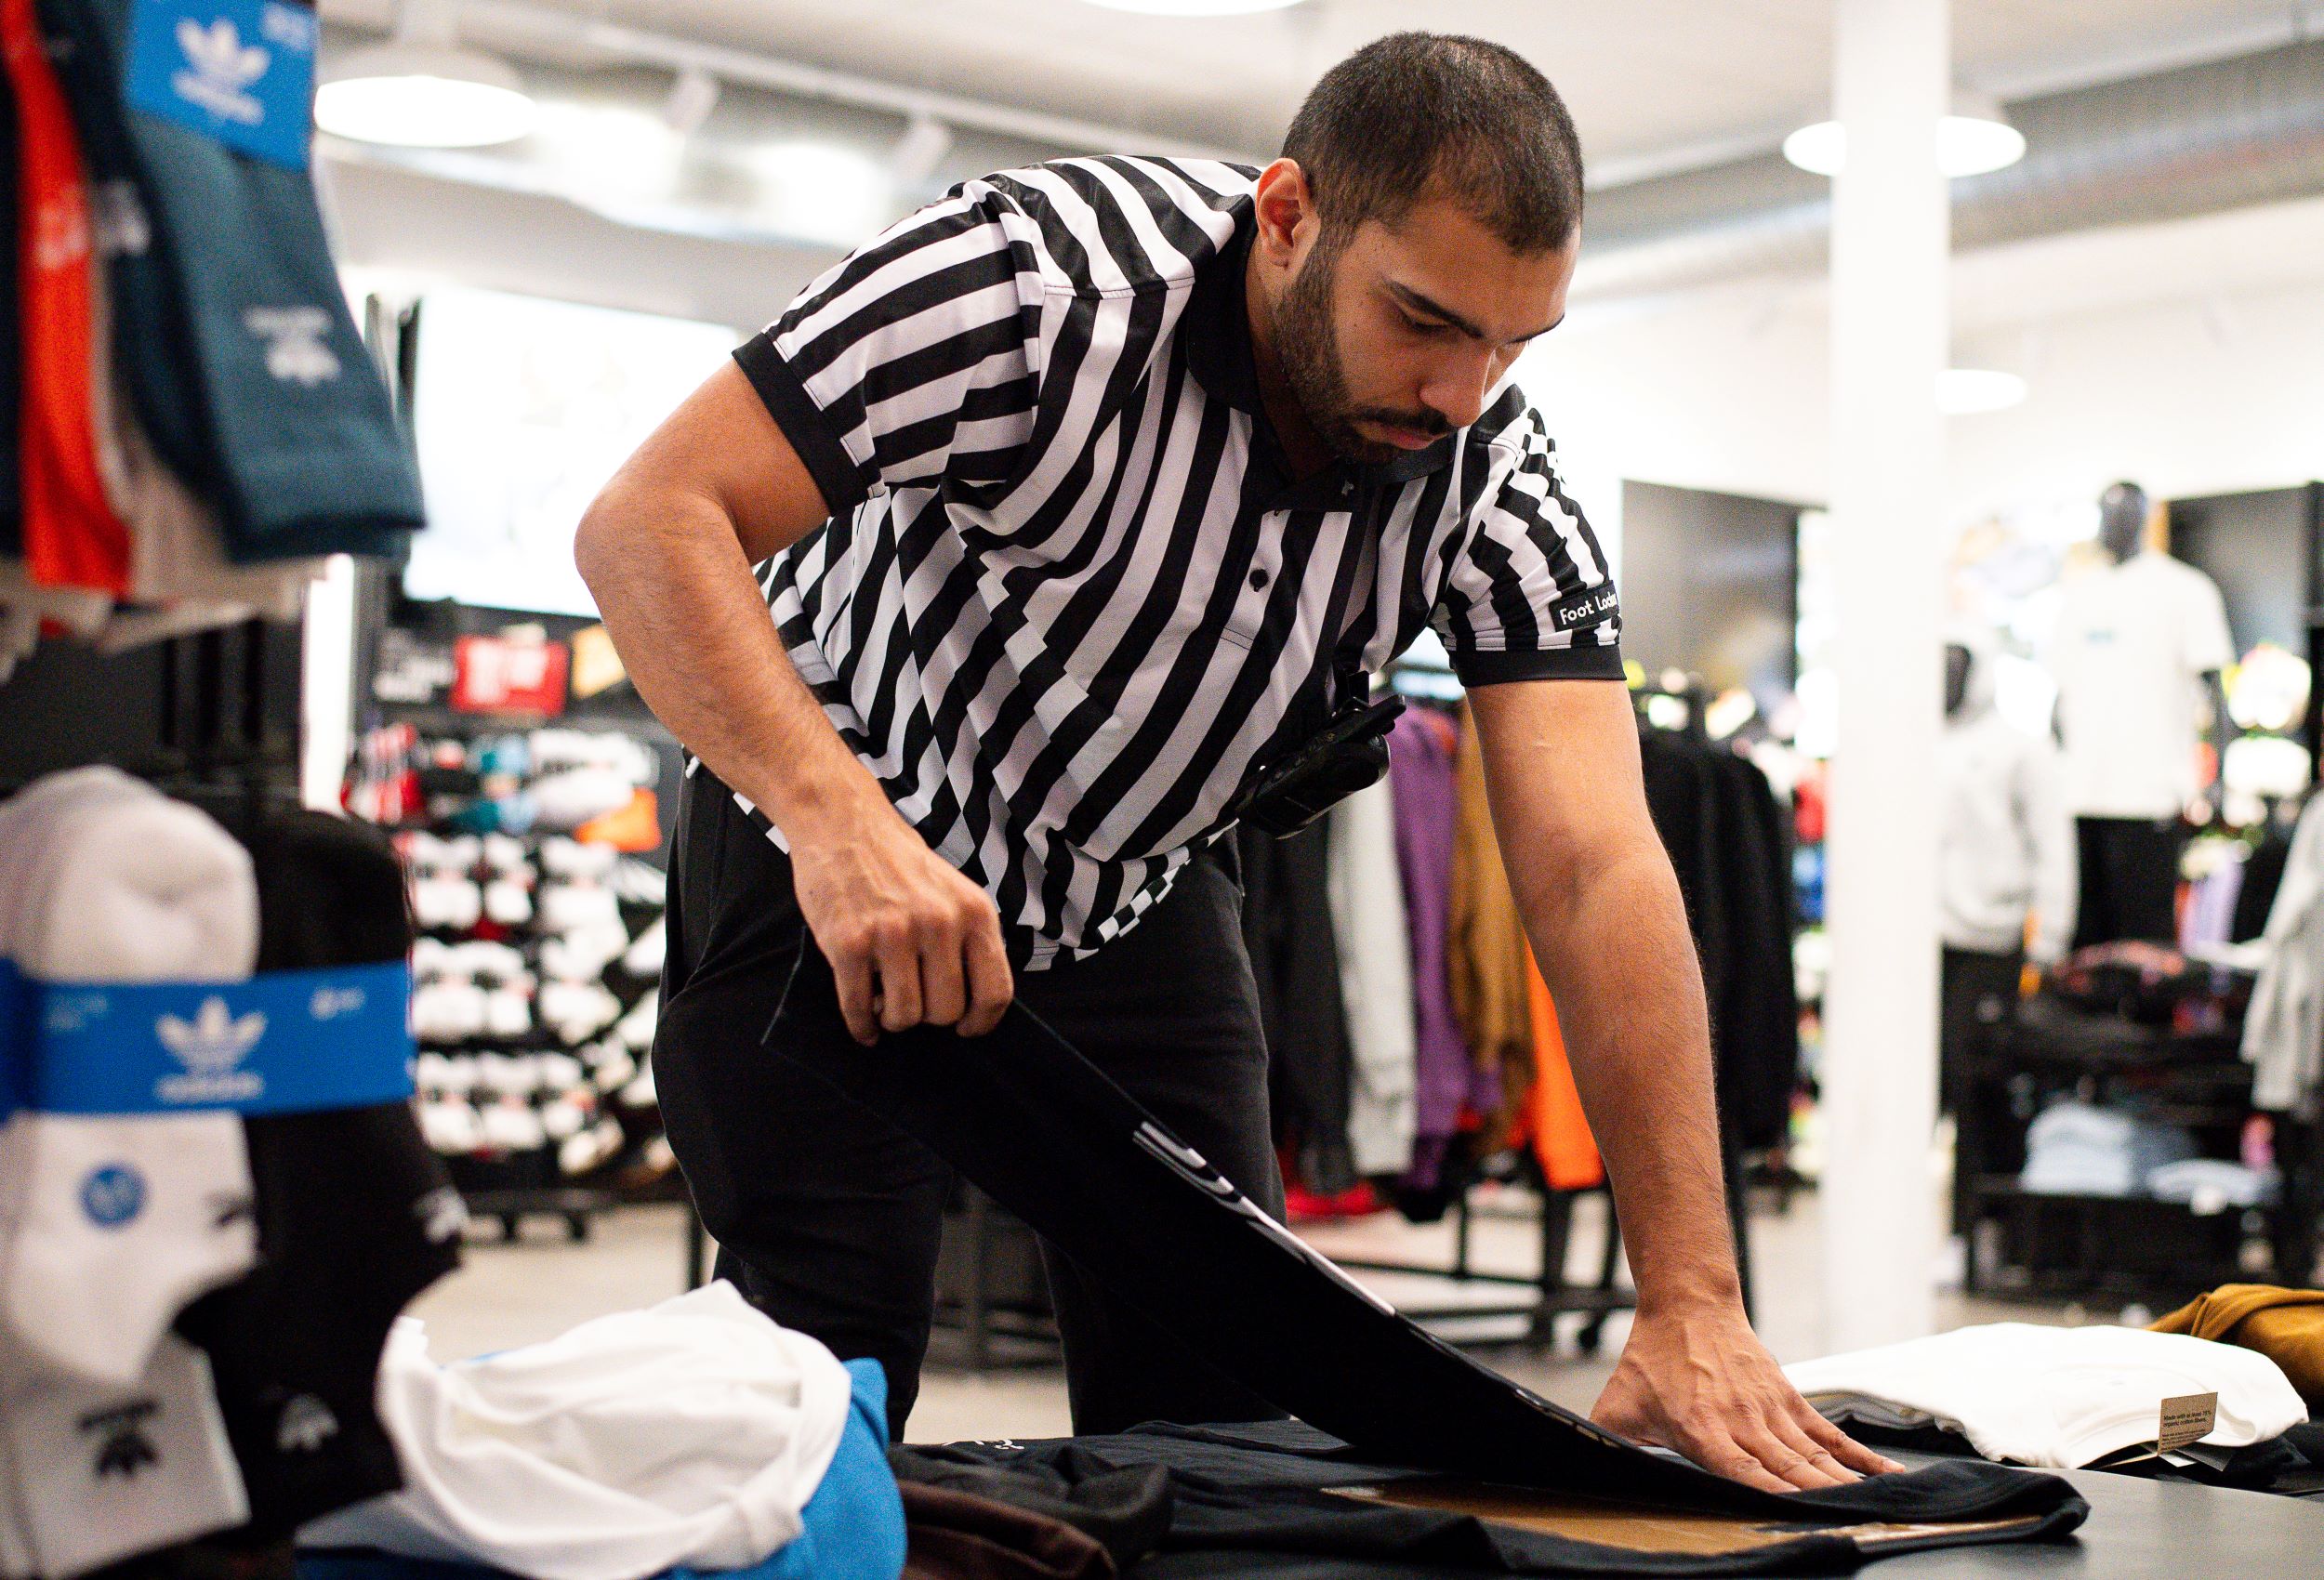 A man in a striped referee shirt folding clothes in a retail store, surrounded by various apparel items.